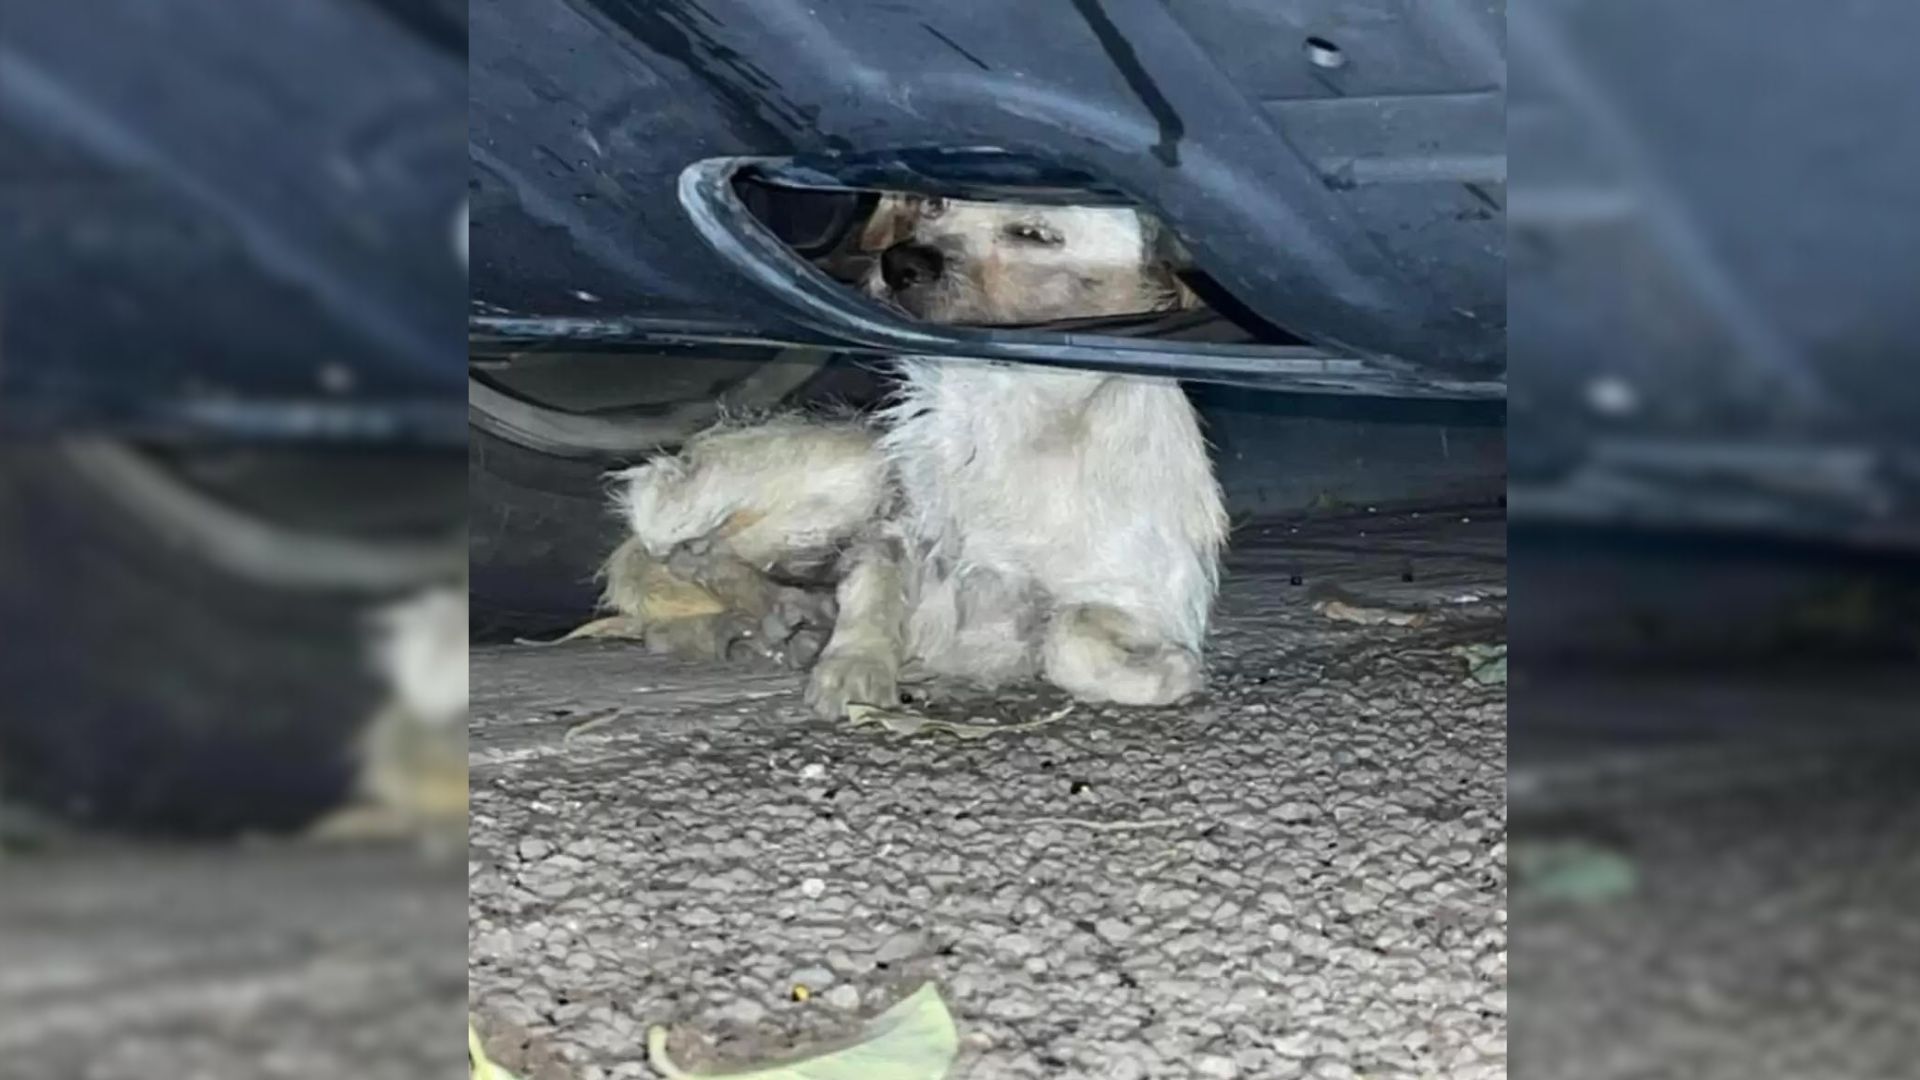 A Puppy Who Found Shelter Underneath A Car